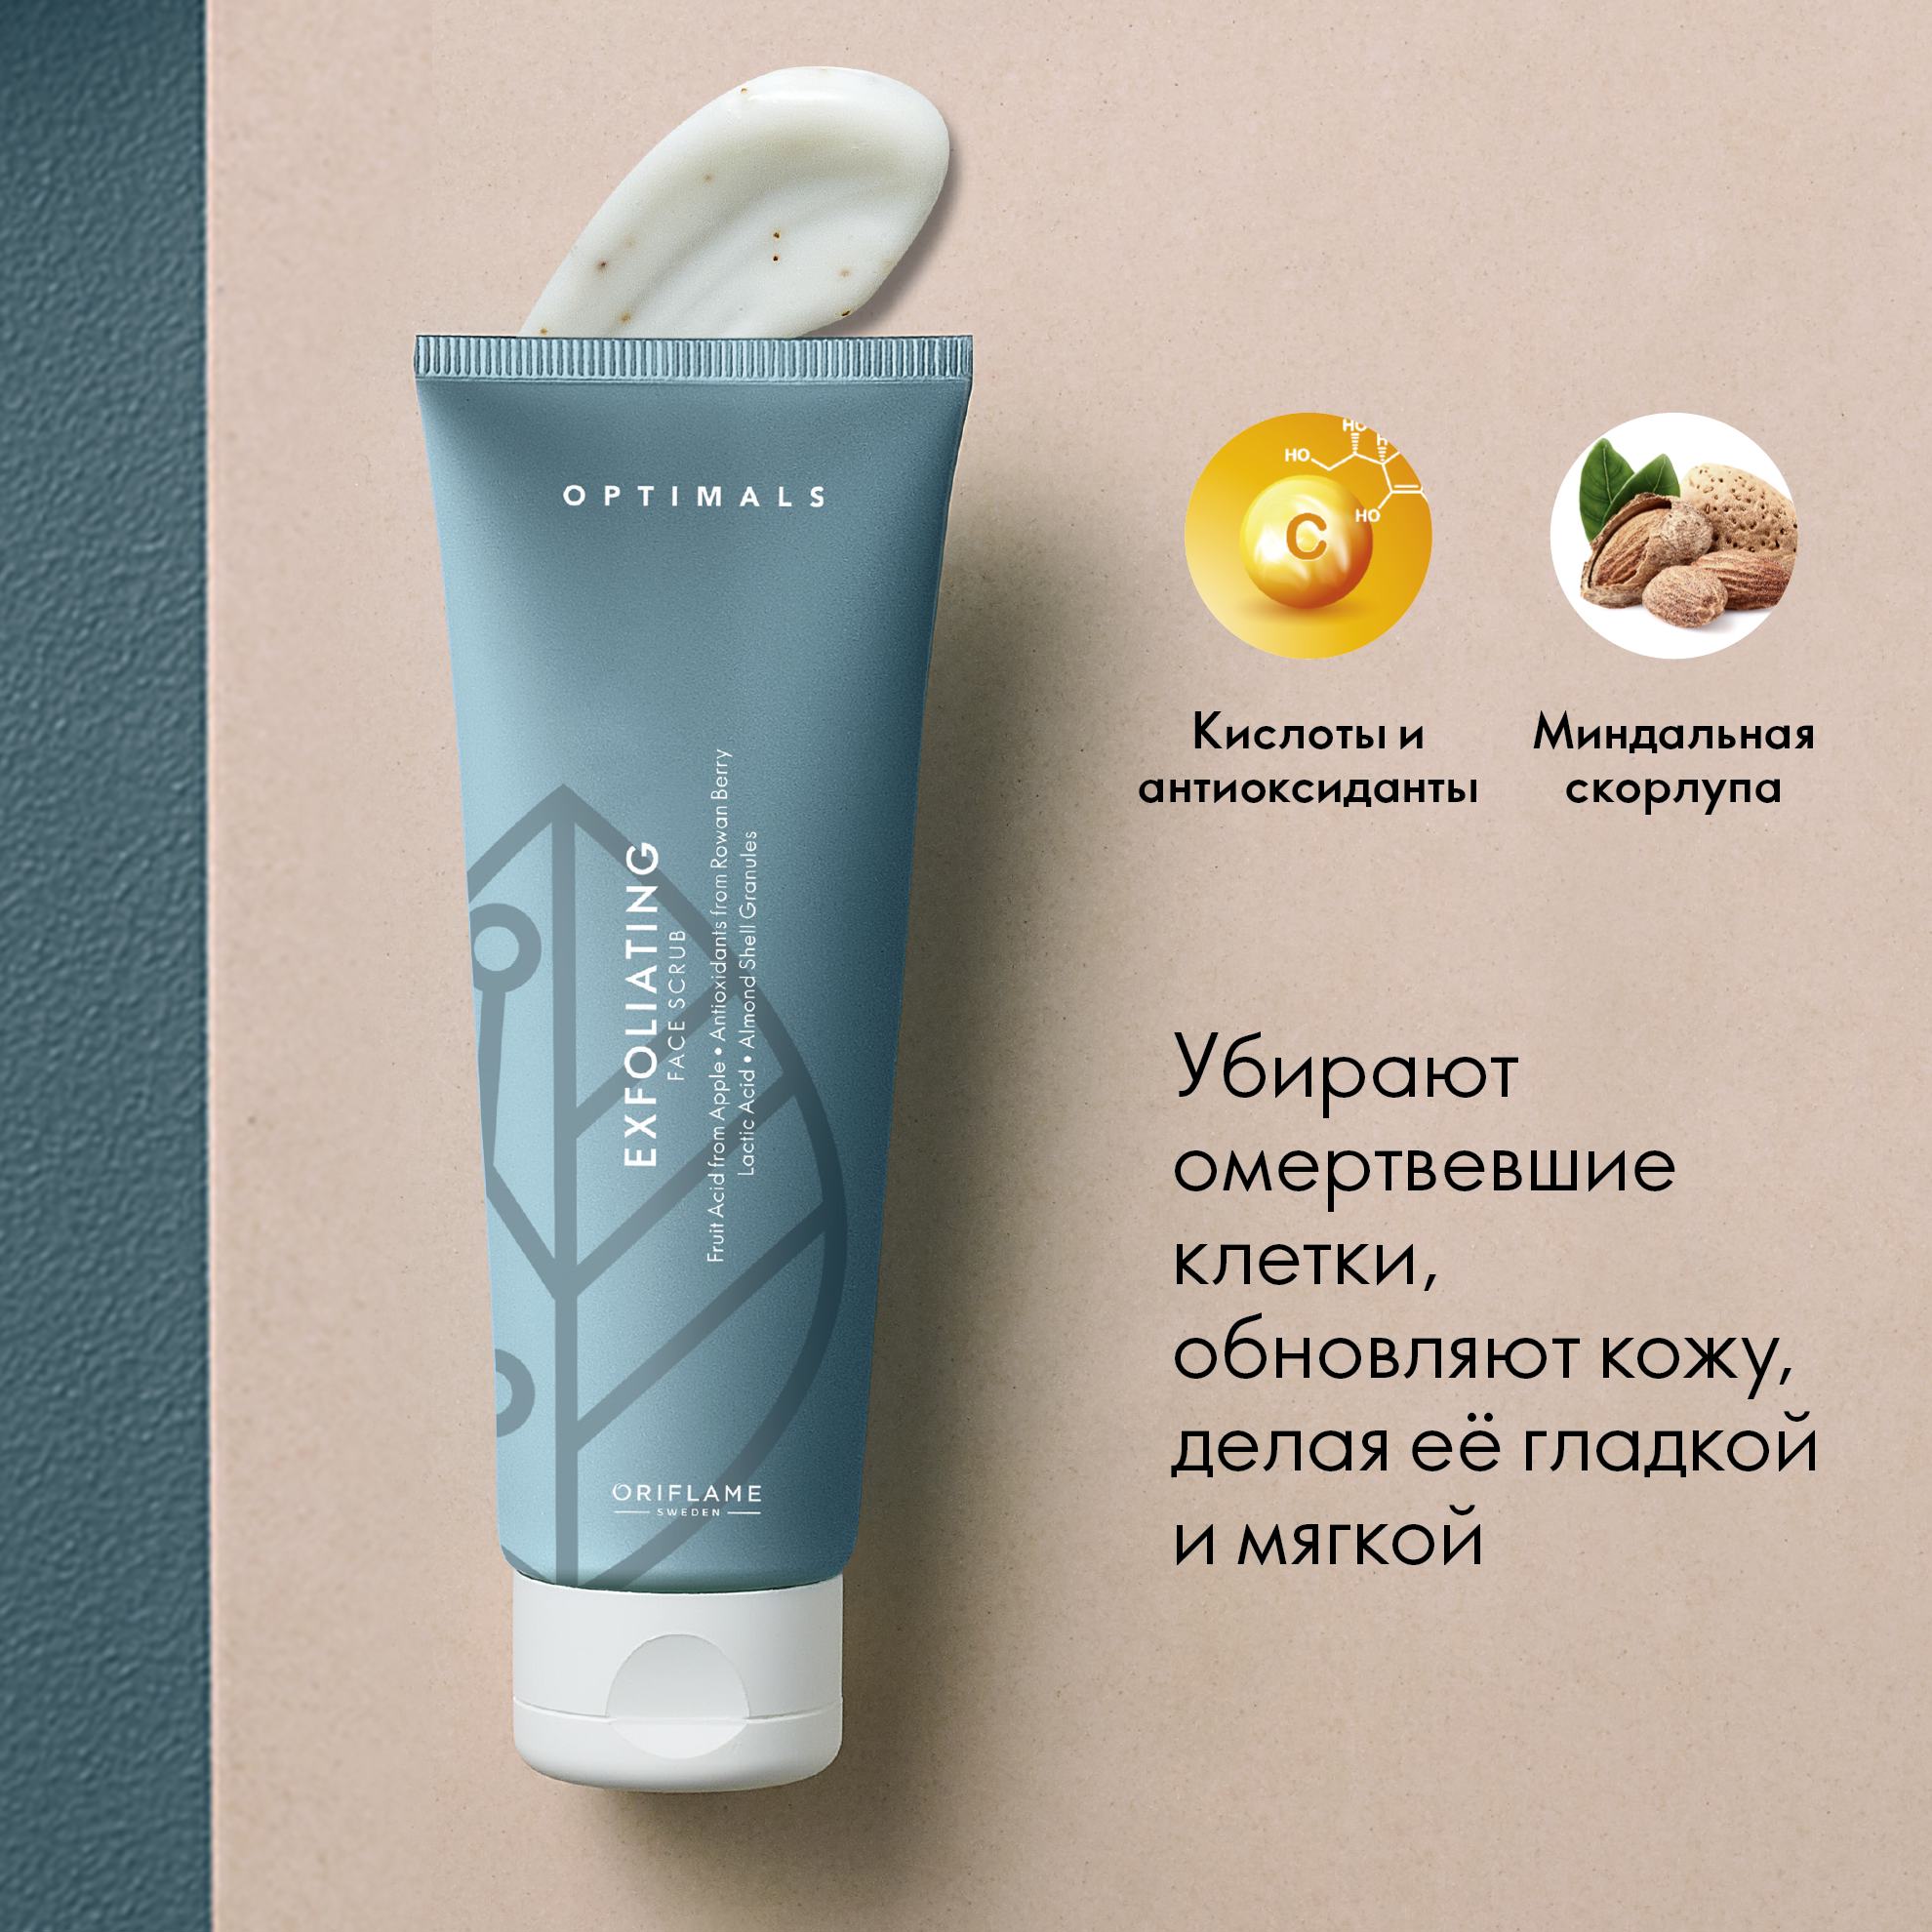 https://media-cdn.oriflame.com/productImage?externalMediaId=product-management-media%2fProducts%2f42614%2fRU%2f42614_3.png&id=15350875&version=1